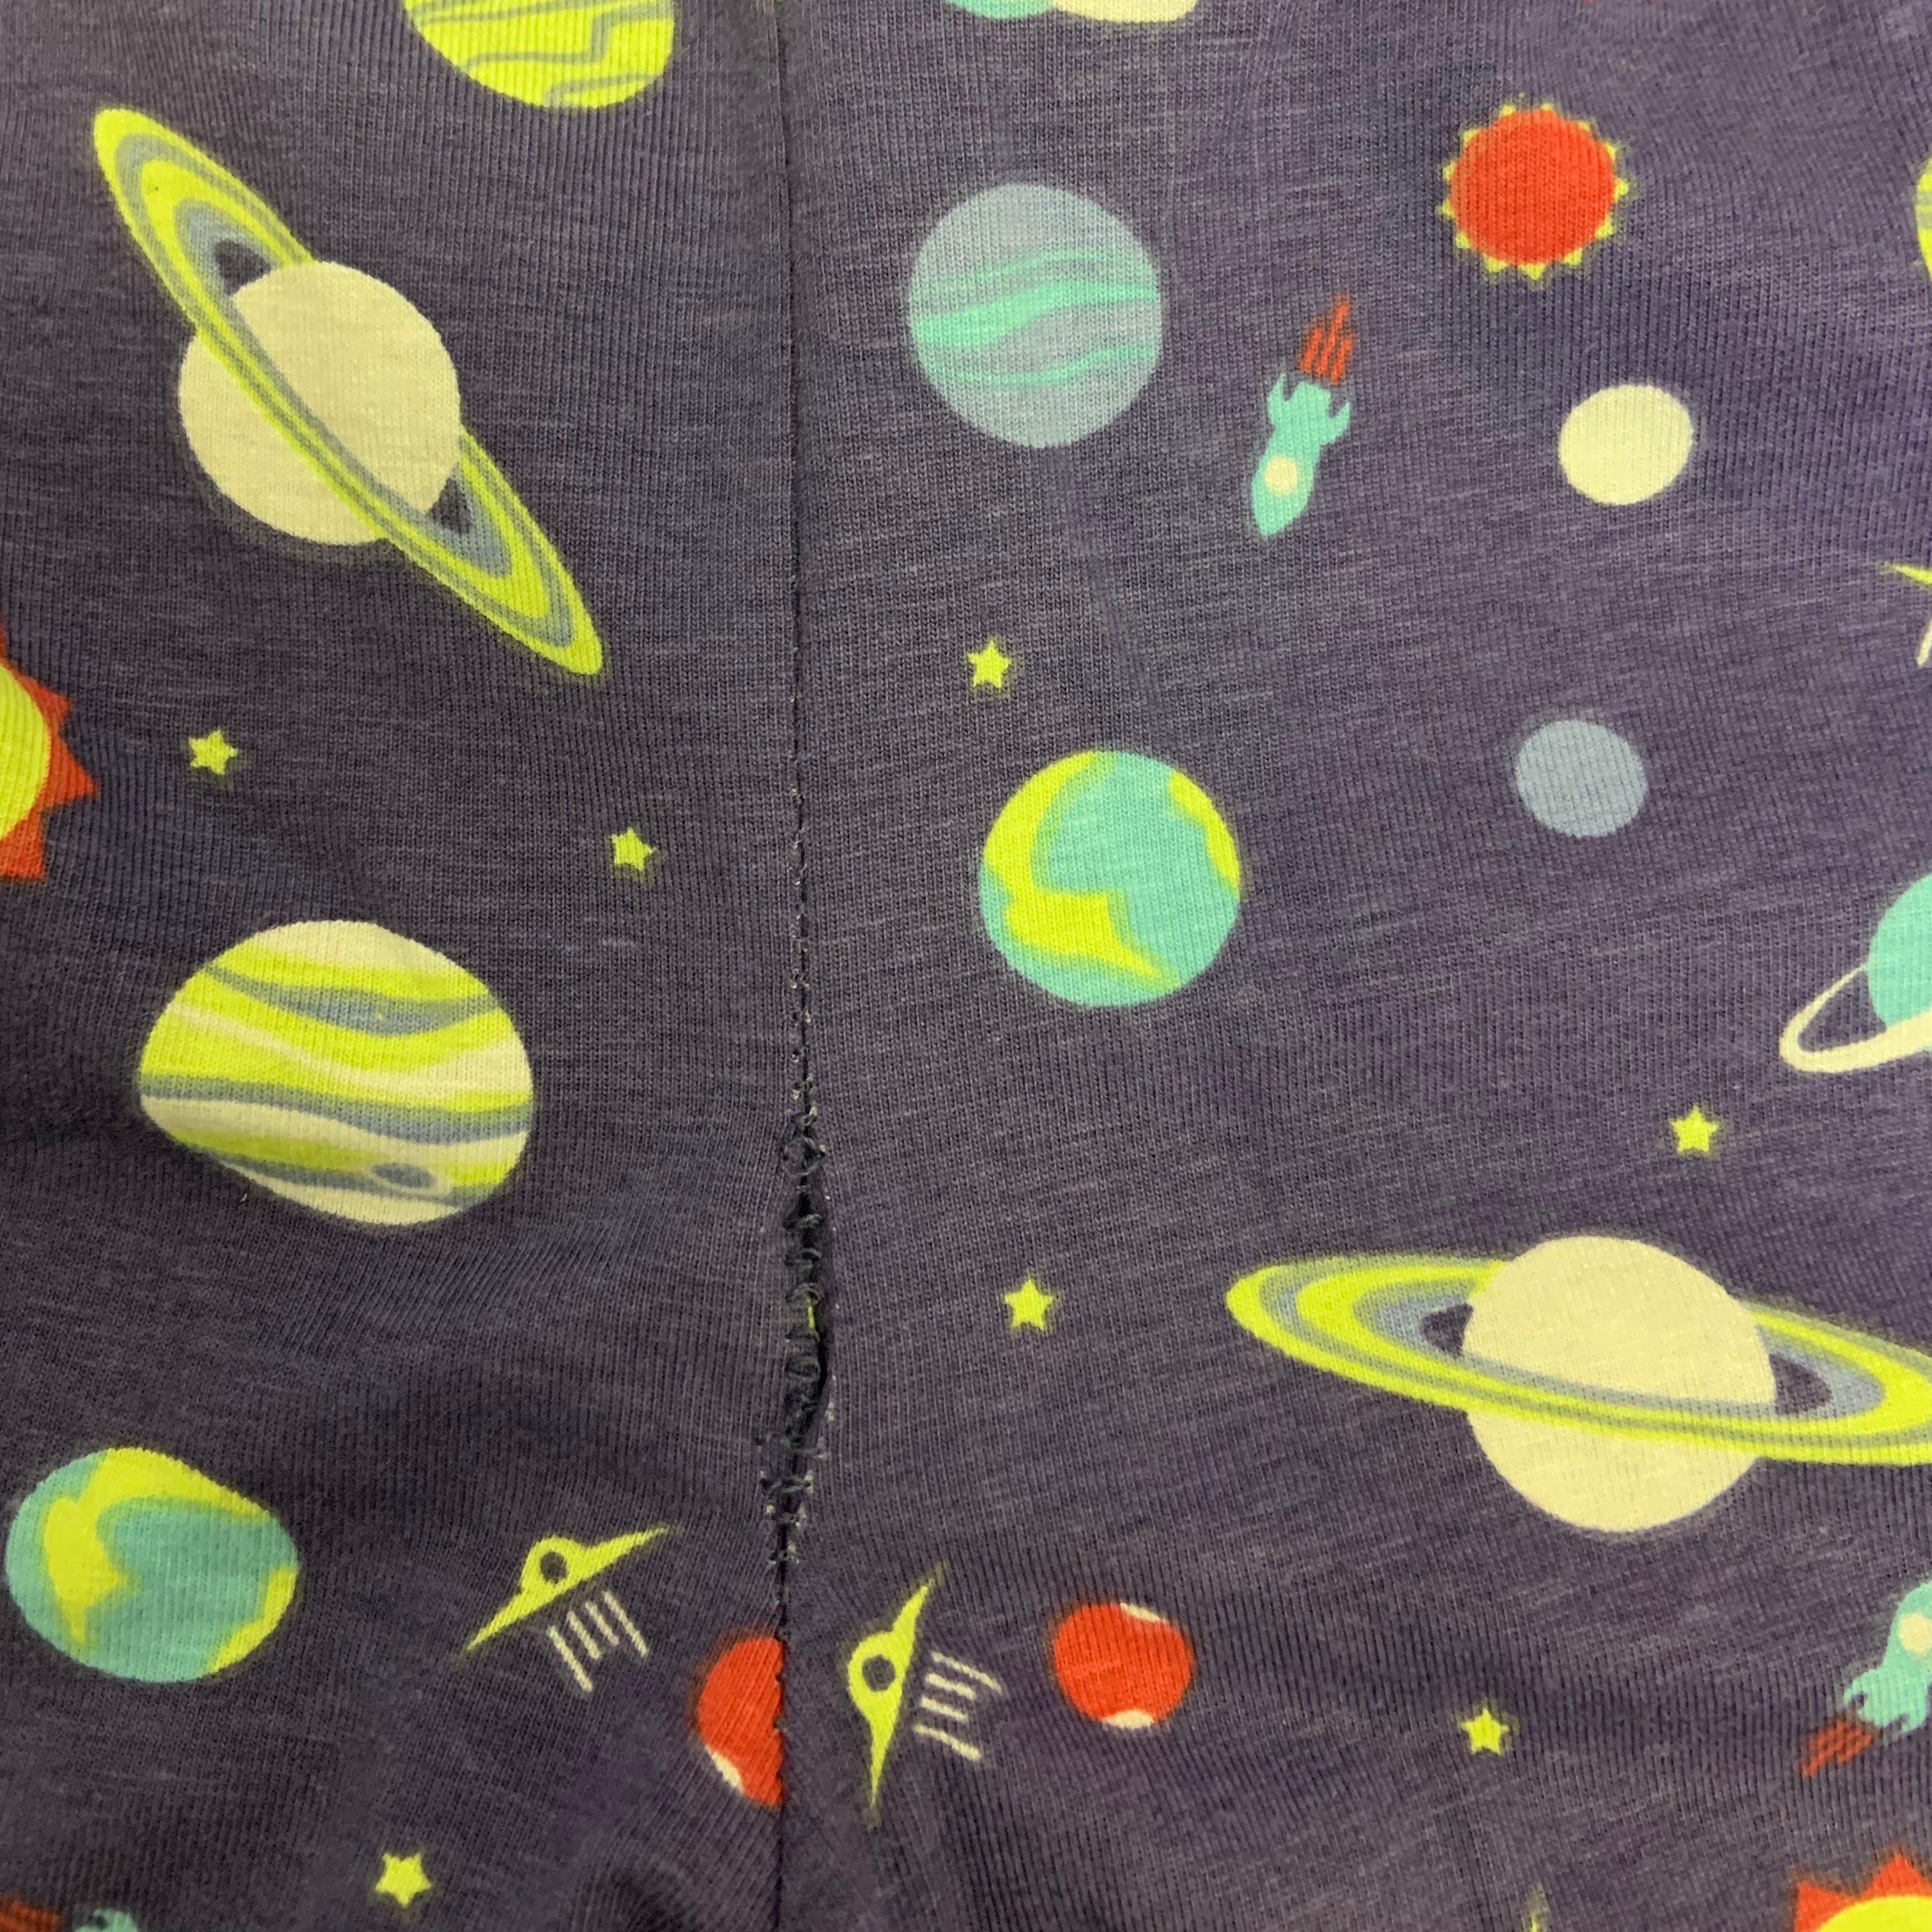 Explore New Worlds Leggings Defective - XS (Rip on front seam)